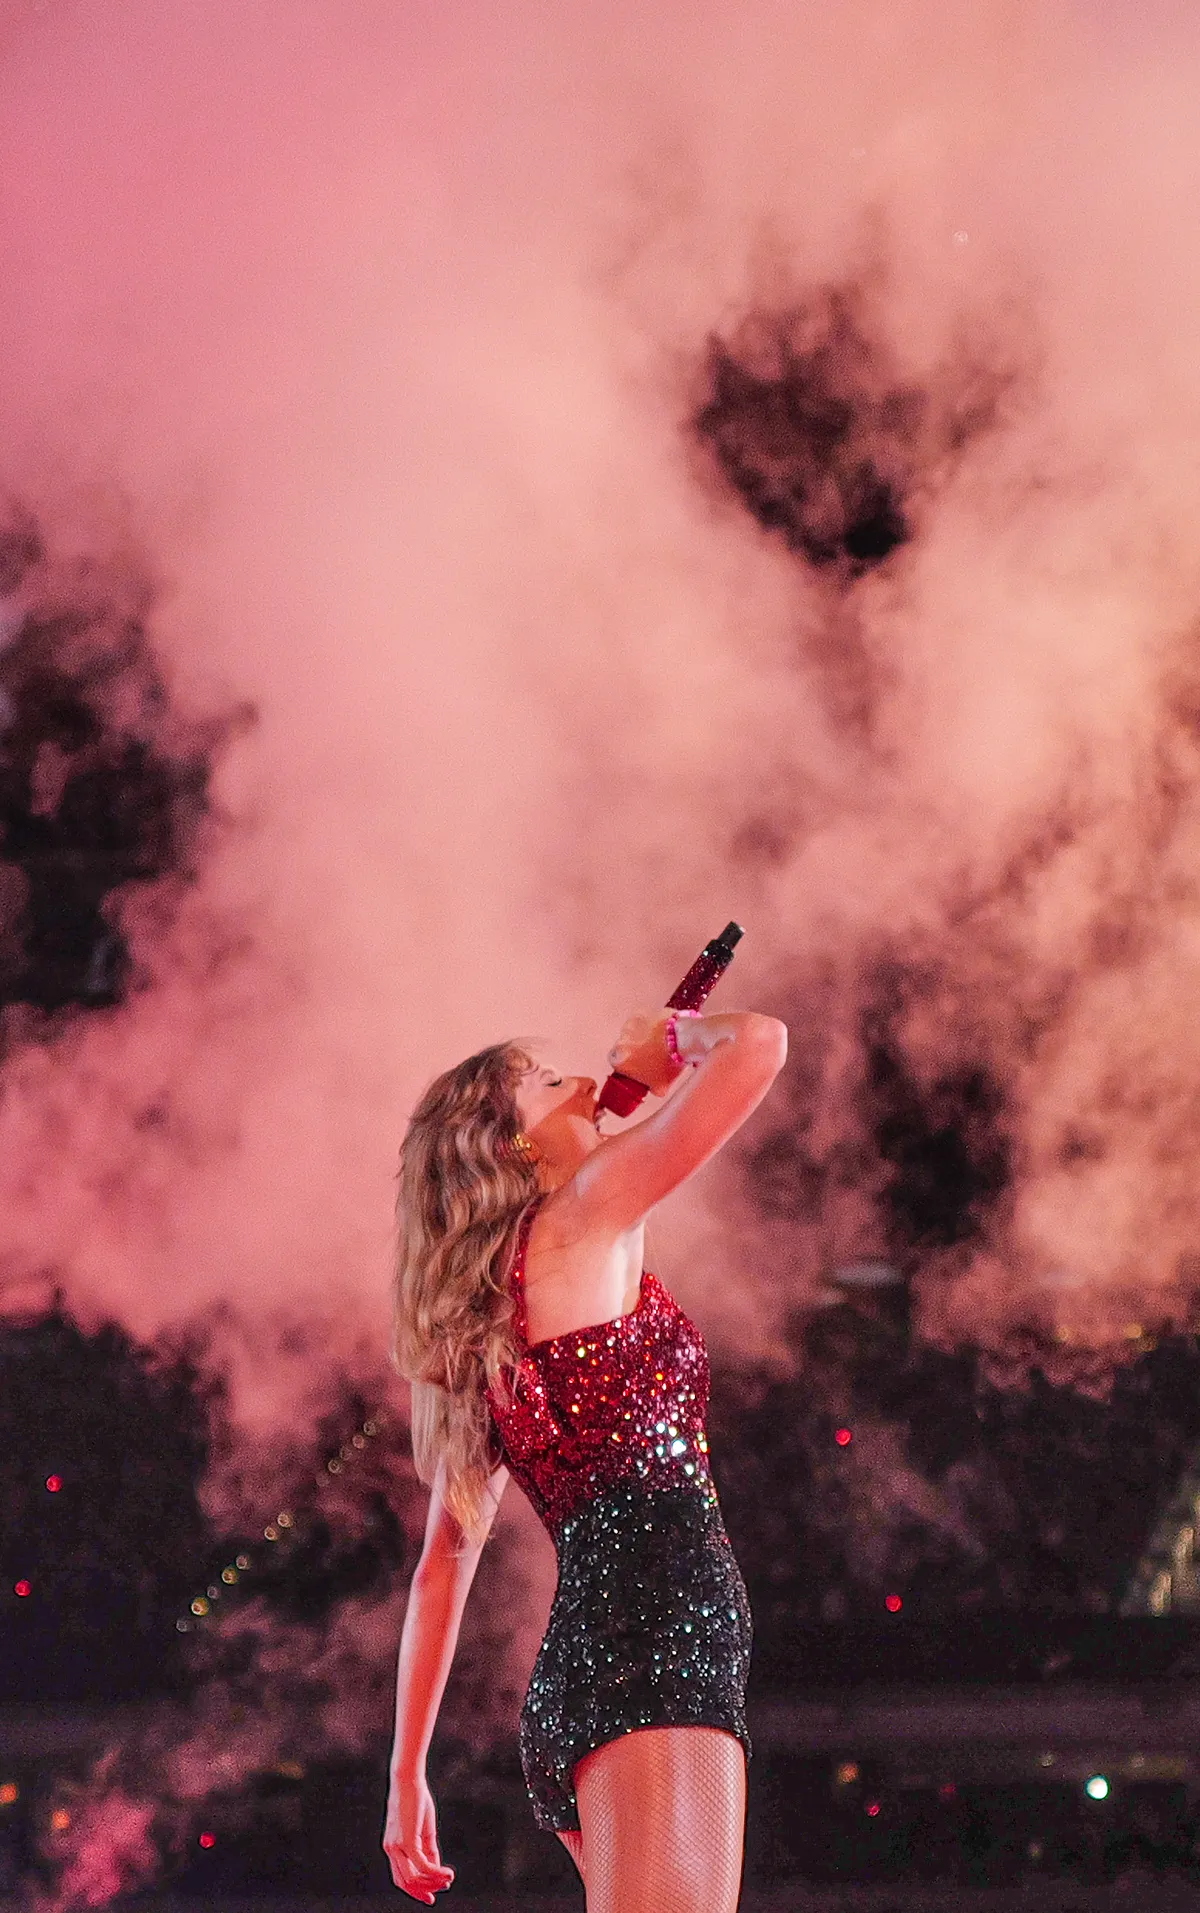 American singer-songwriter Taylor Swift on the Eras Tour in concert at Sofi Stadium in Inglewood, CA, Aug 9 2023.